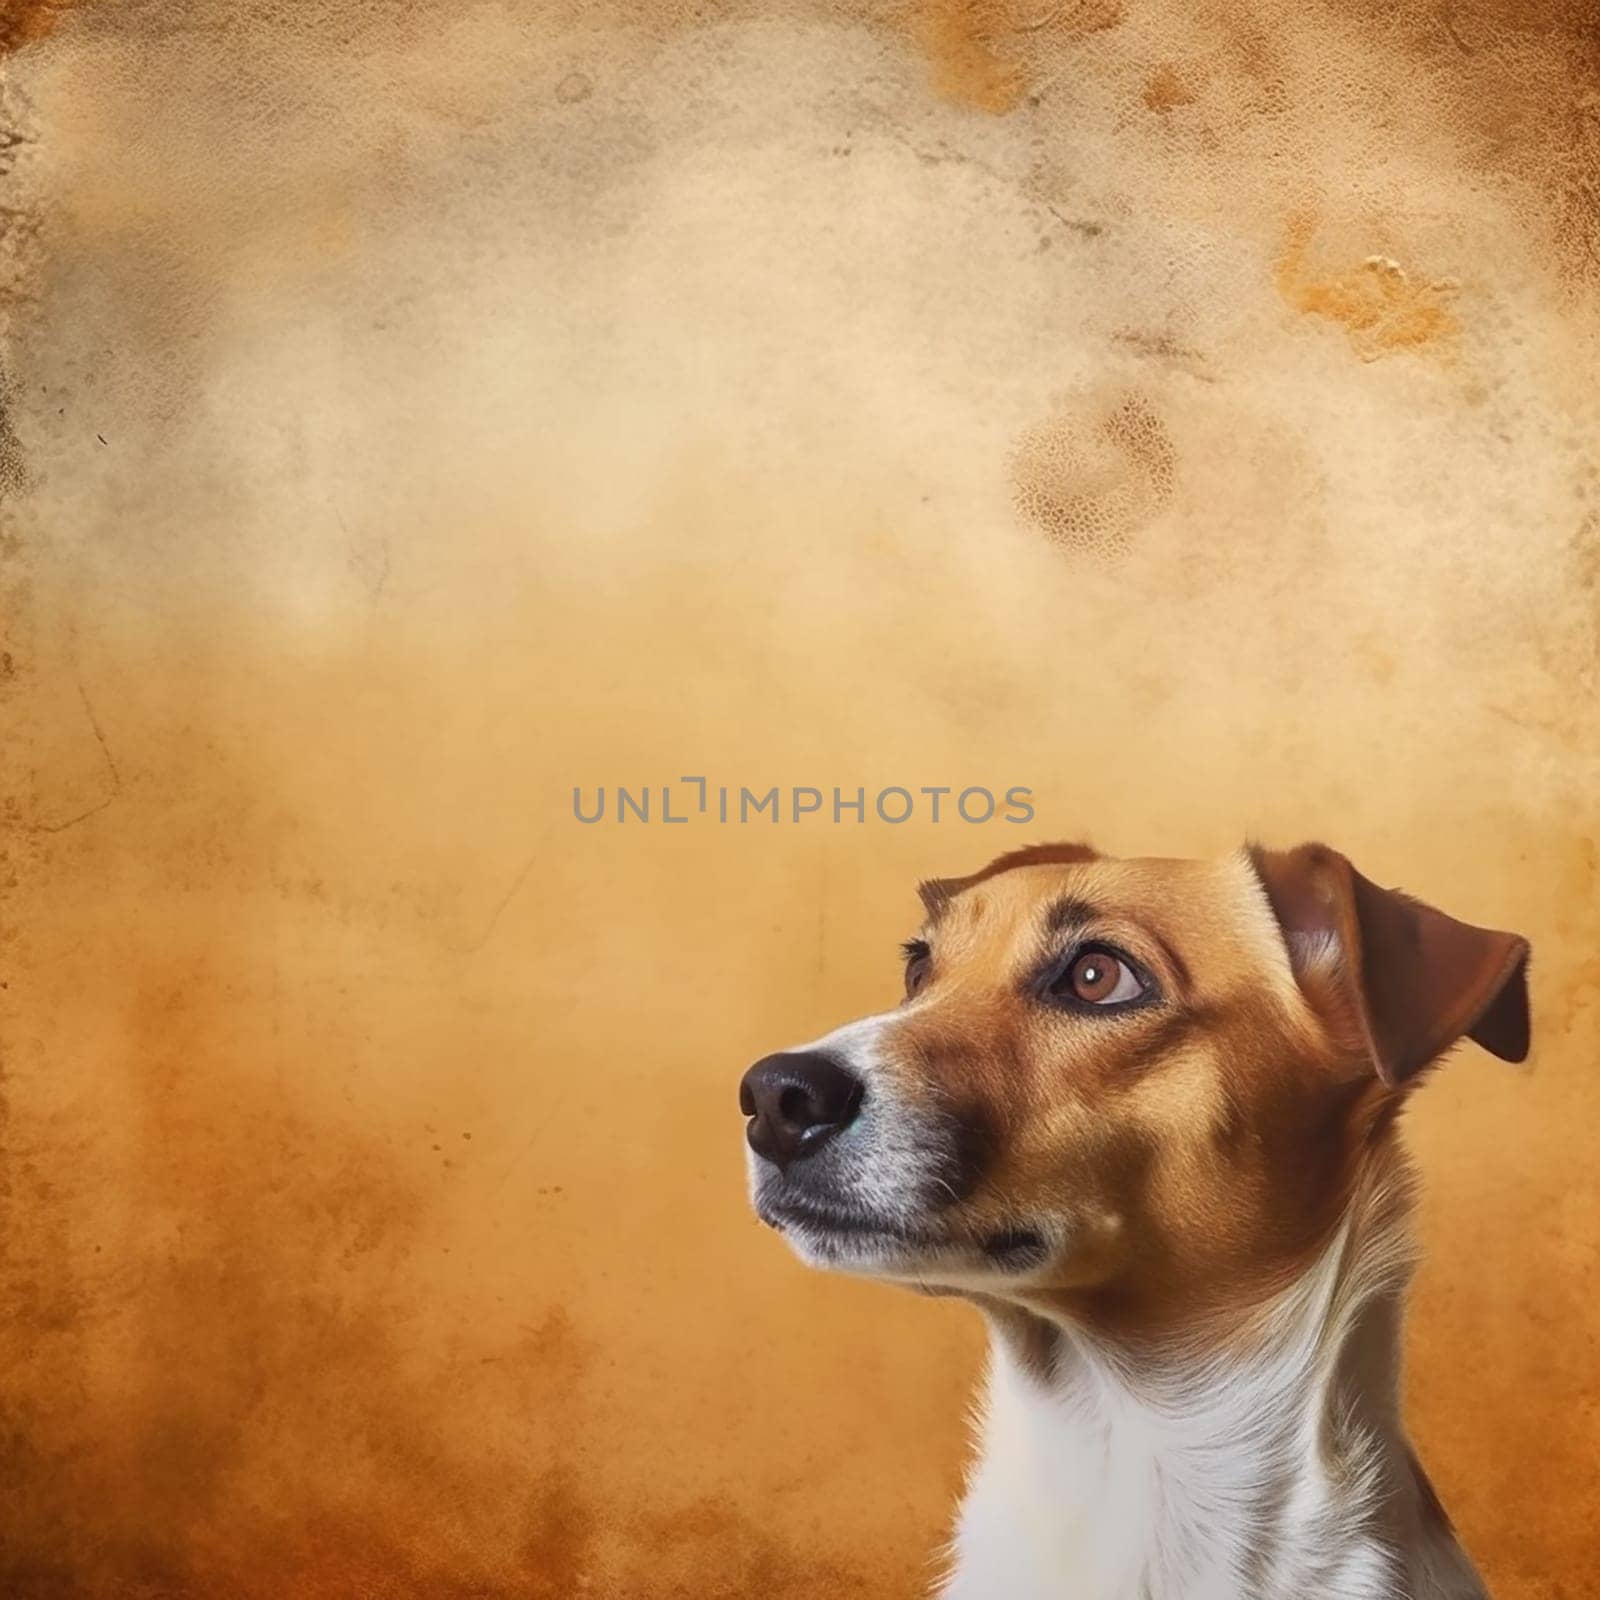 A happy and funny dog looking in front, neutral background